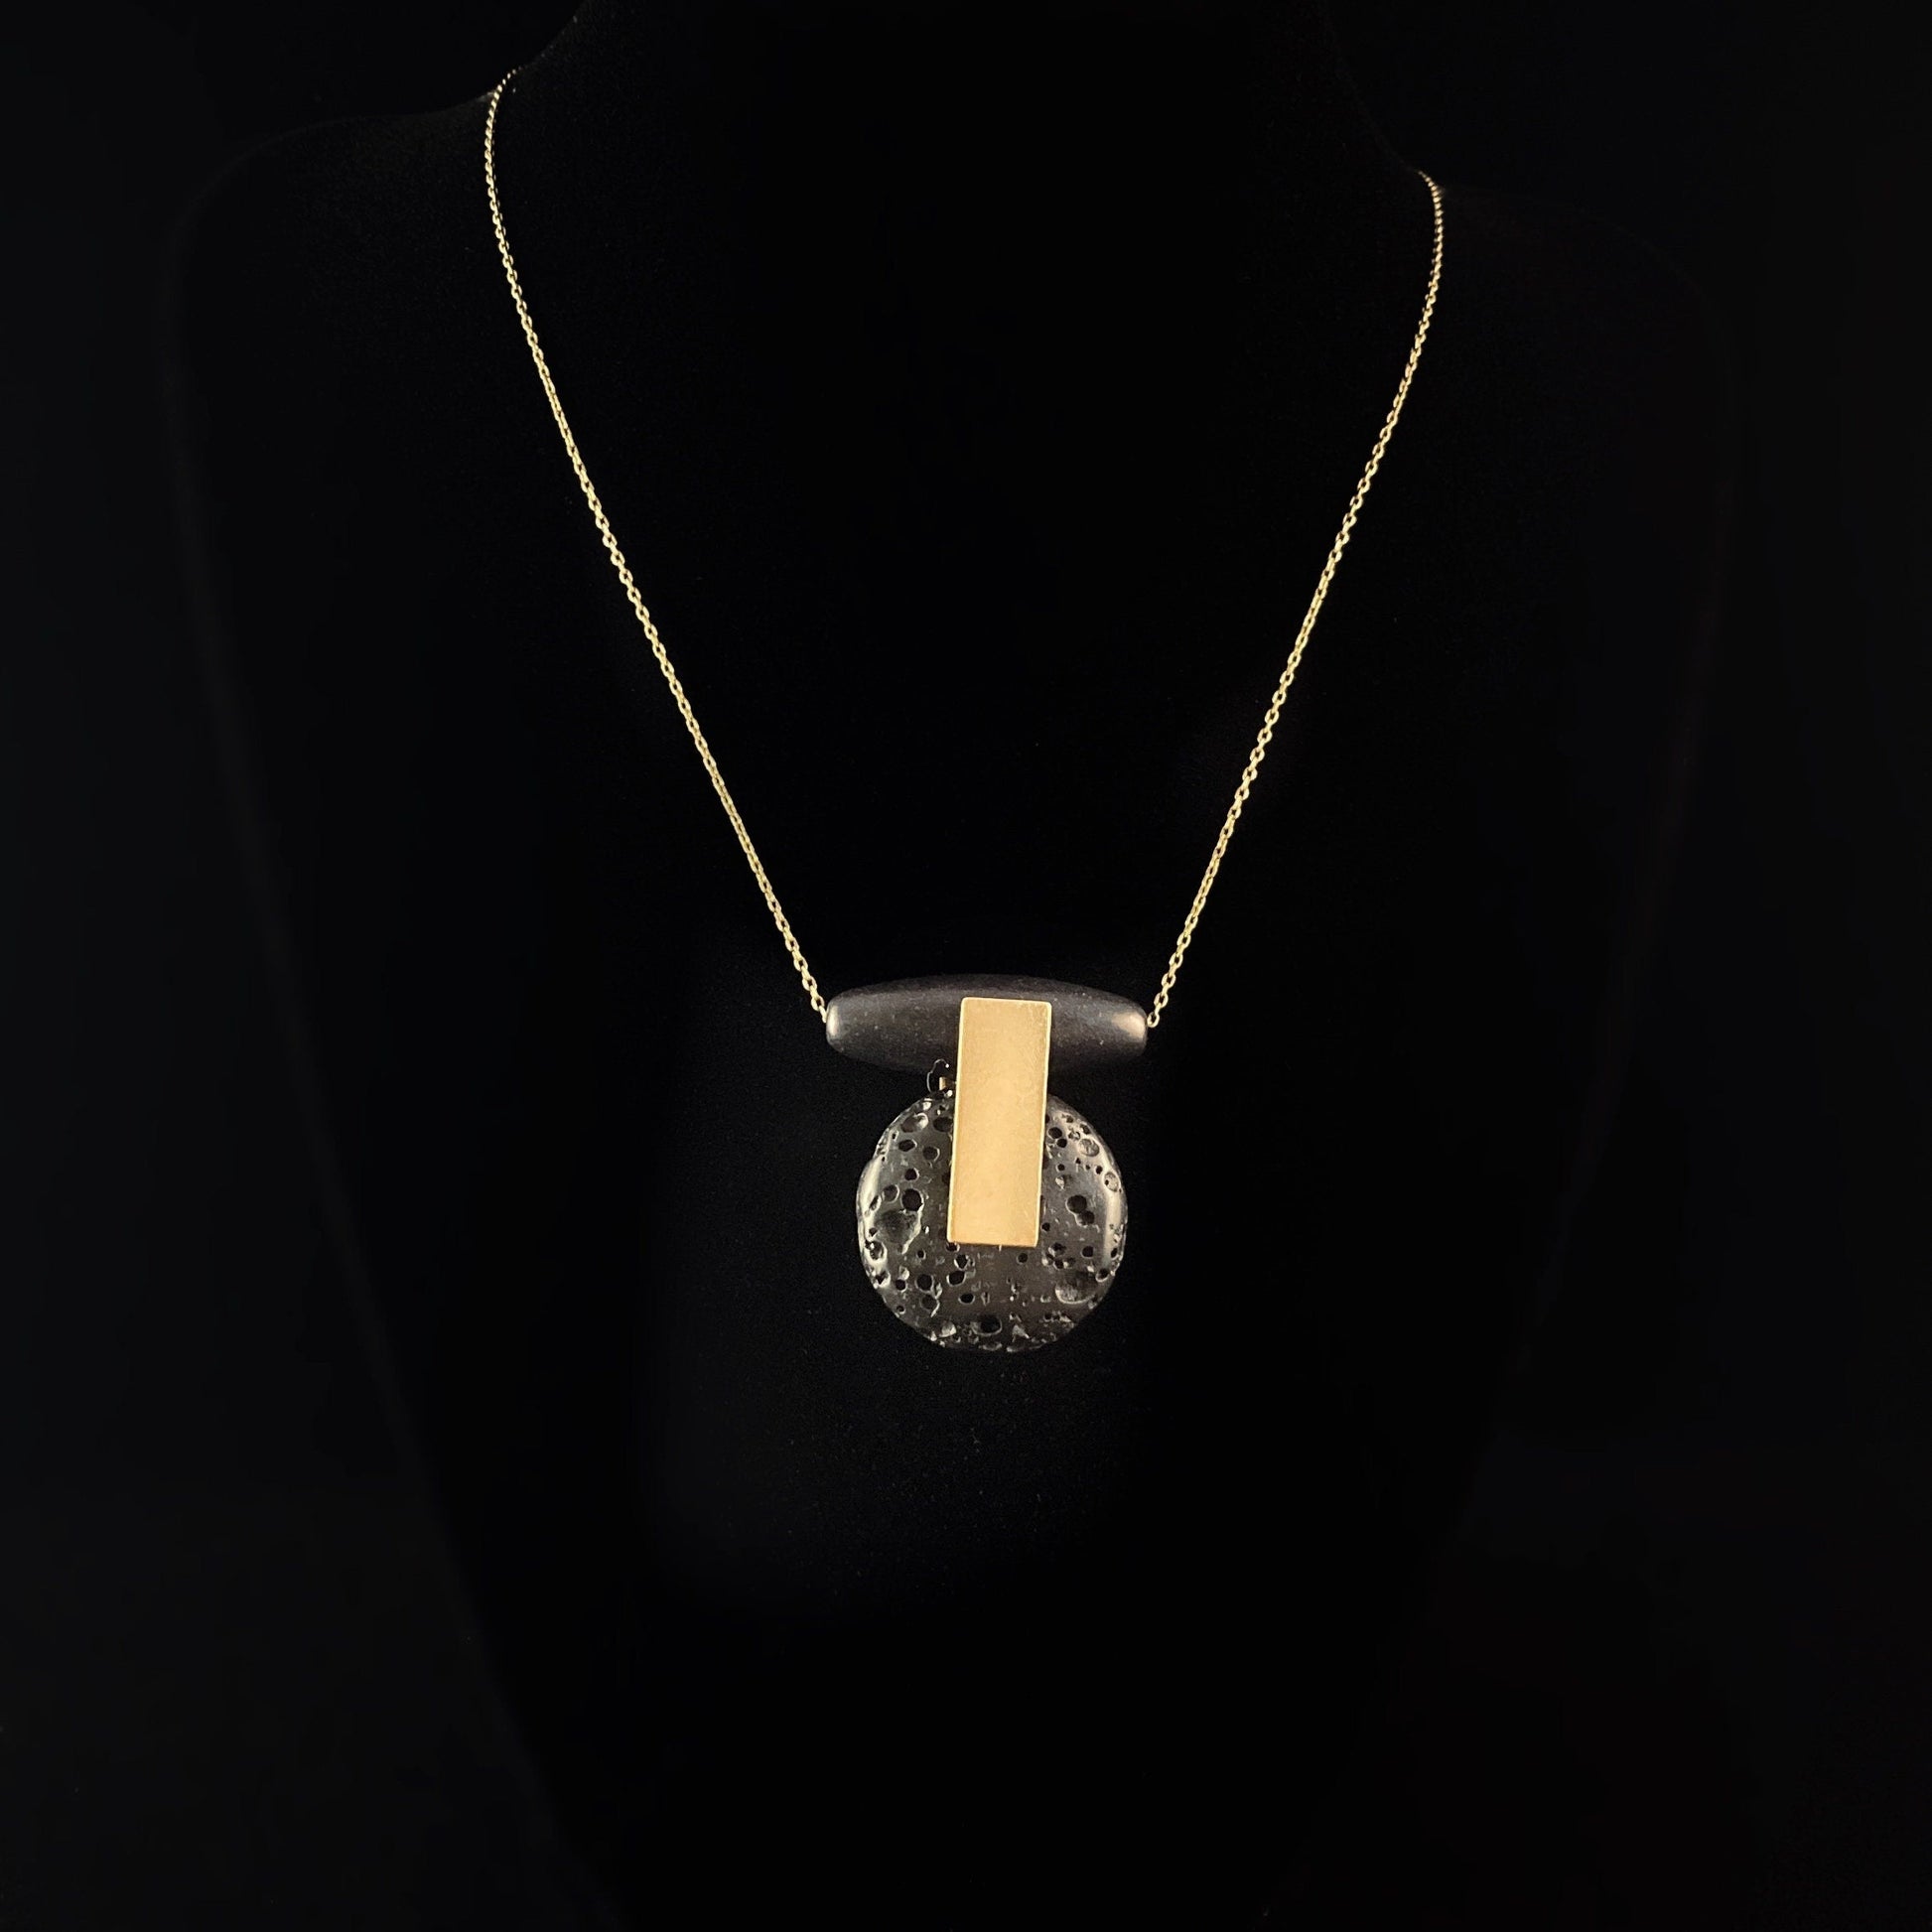 Gold Geometric Art Deco Pendant Necklace - Lava Stone and Magnesite Necklace with 18kt Gold Plated Detailing , David Aubrey Jewelry